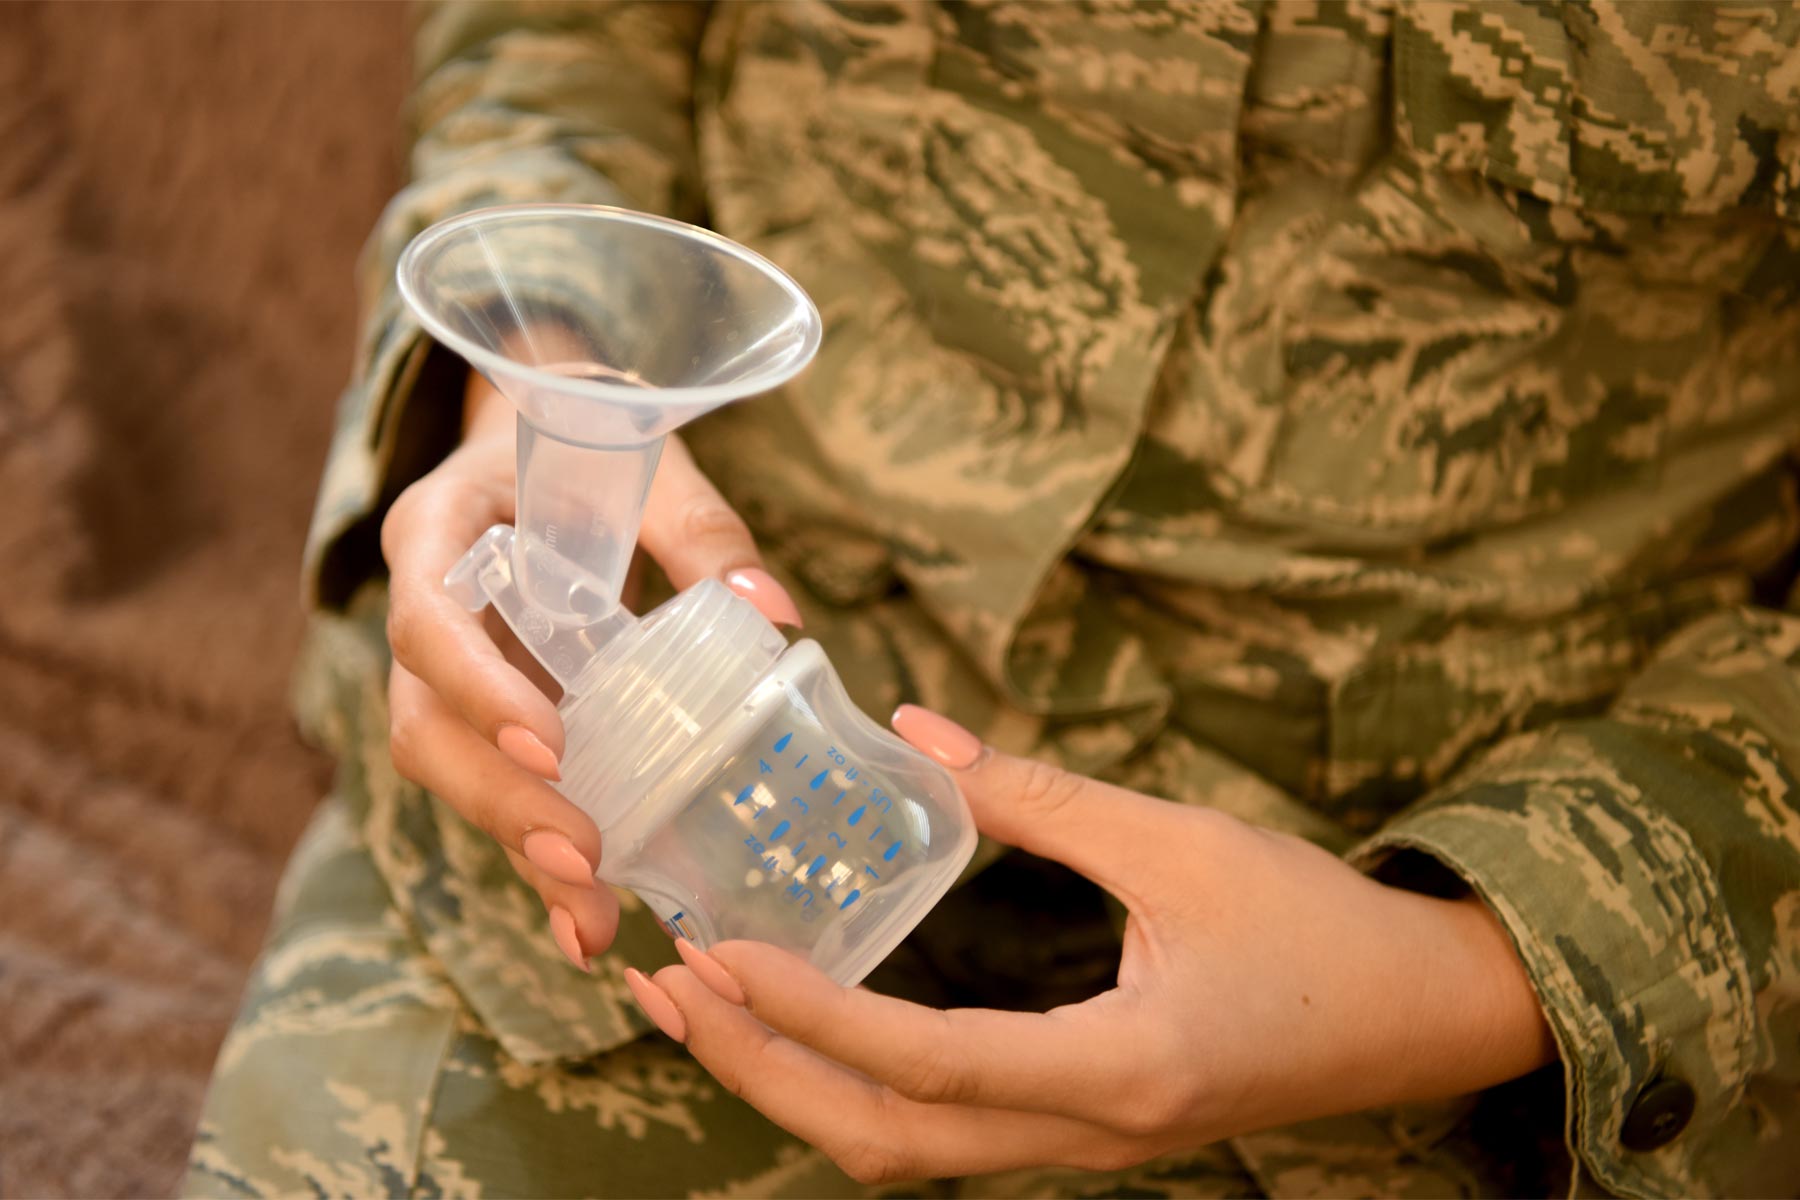 tricare covered breast pump